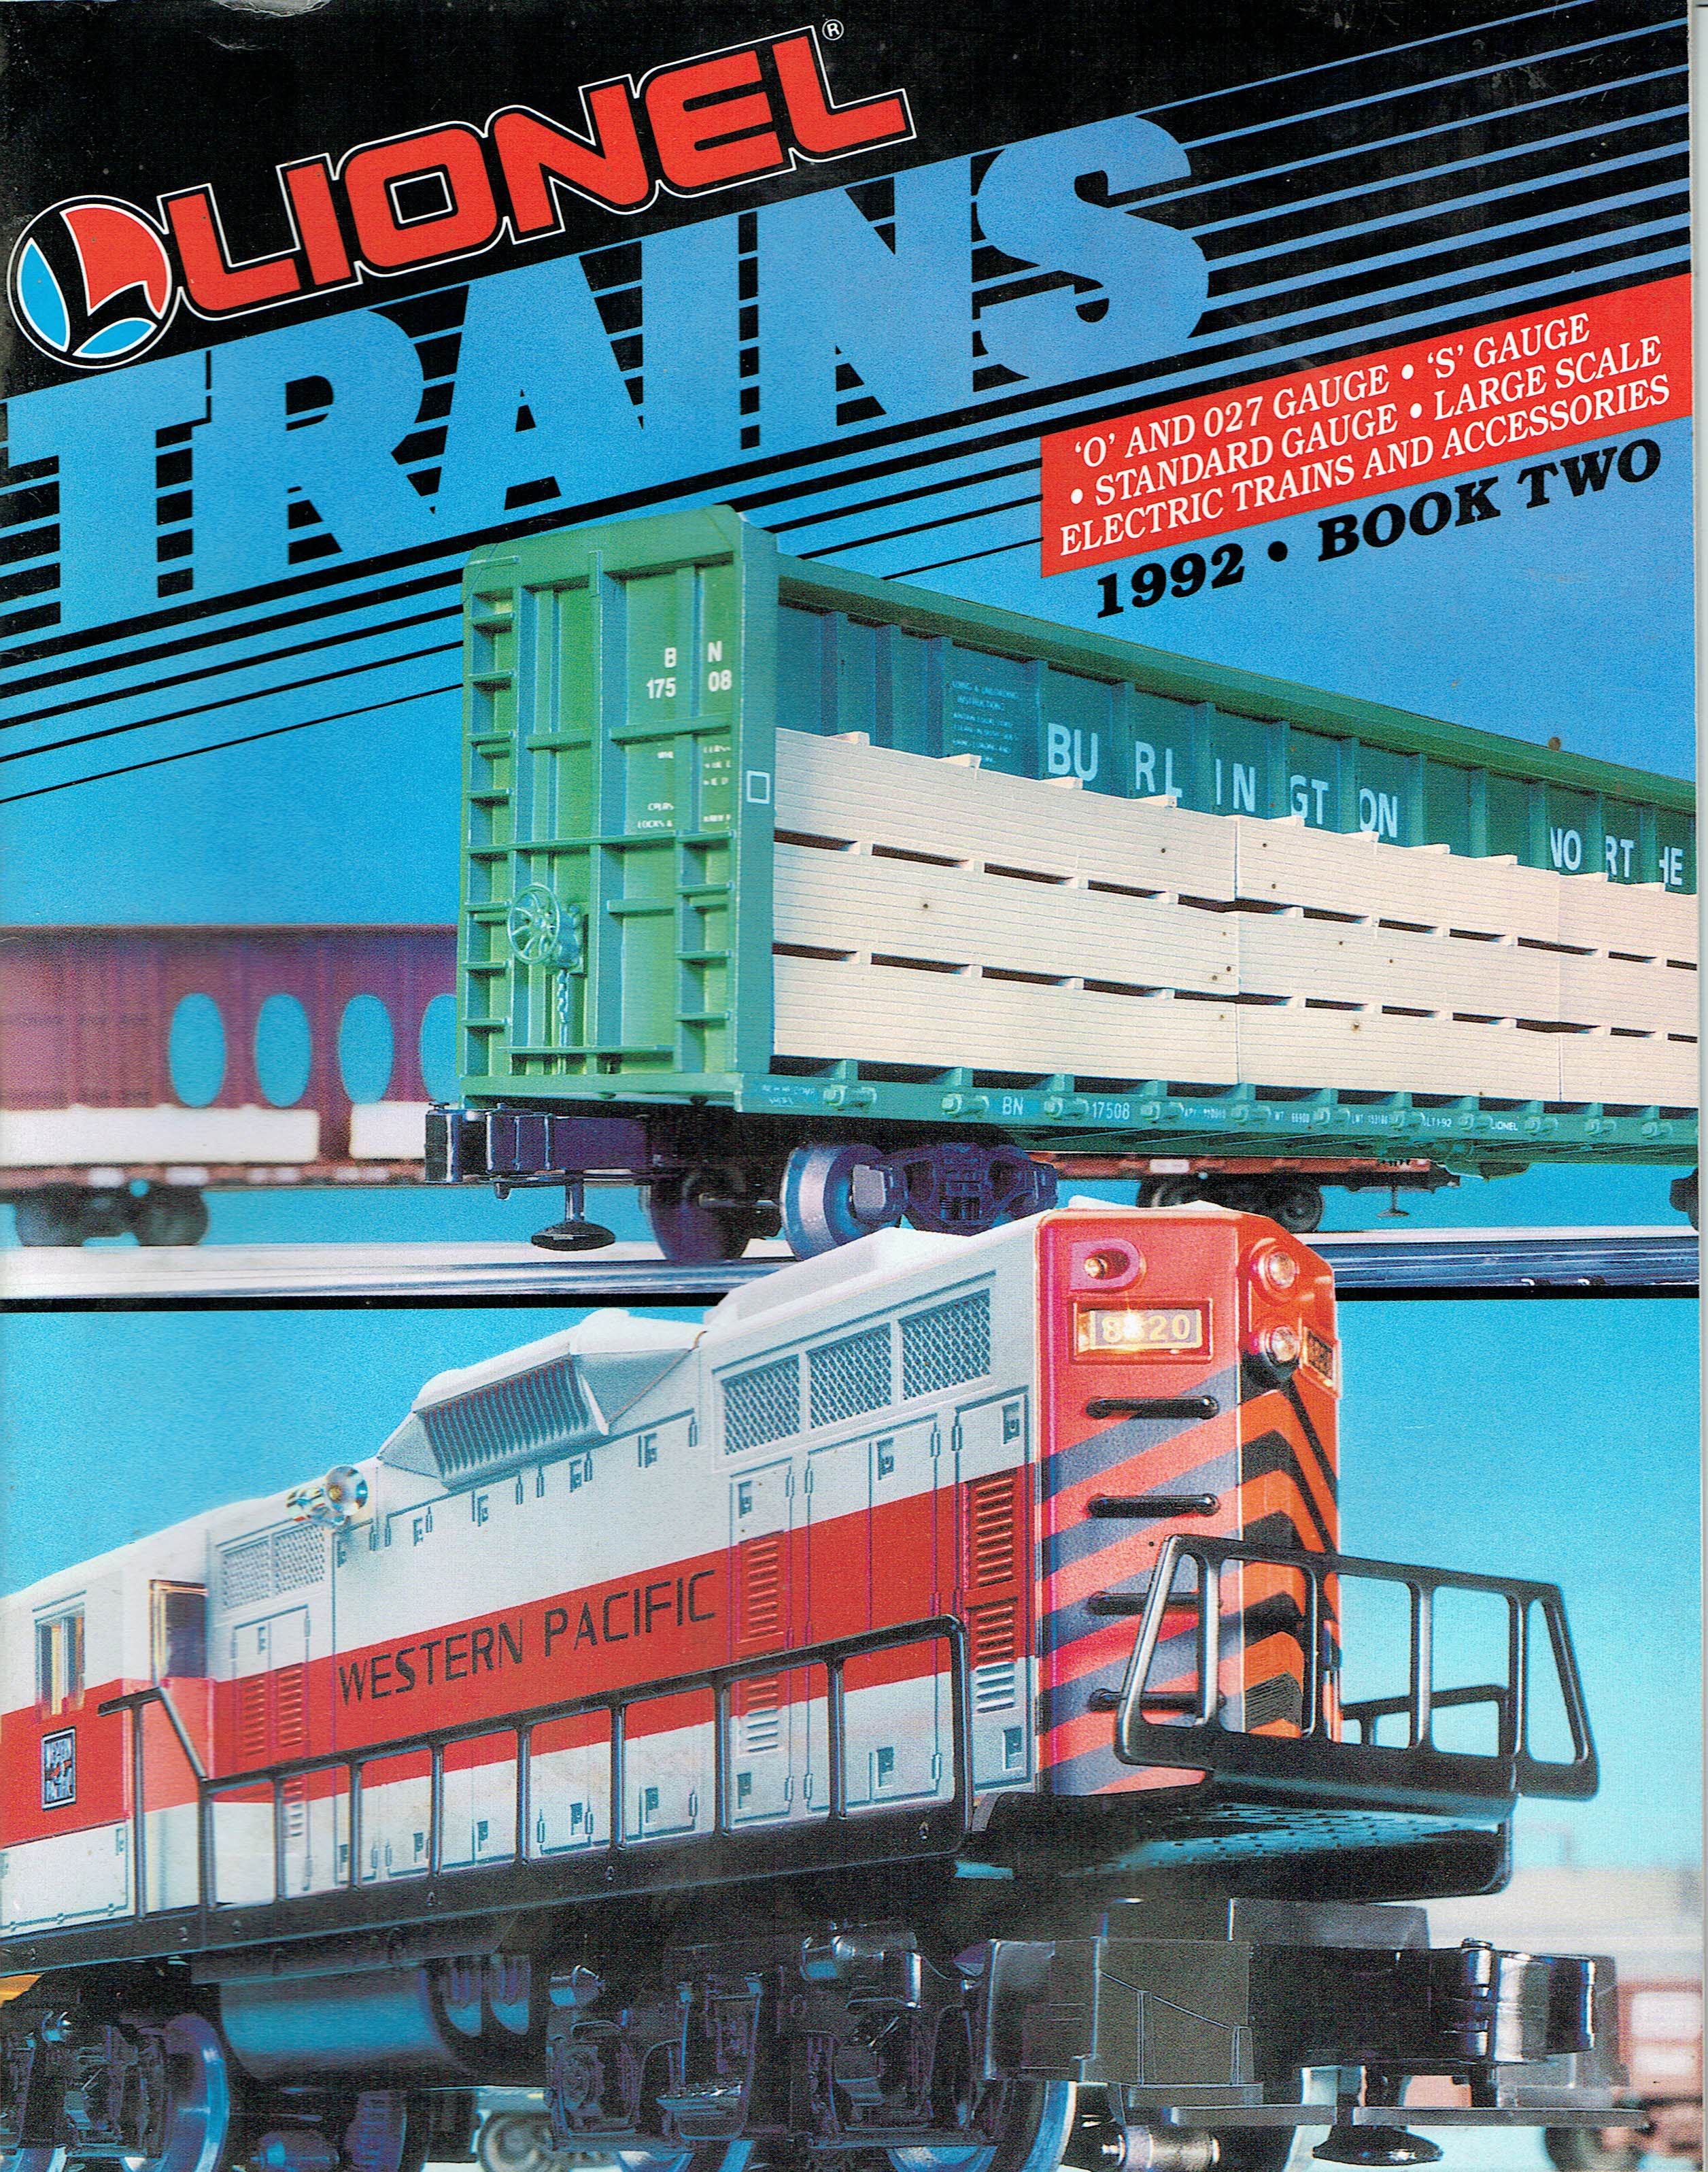 Lionel 1992 Book Two Catalog image